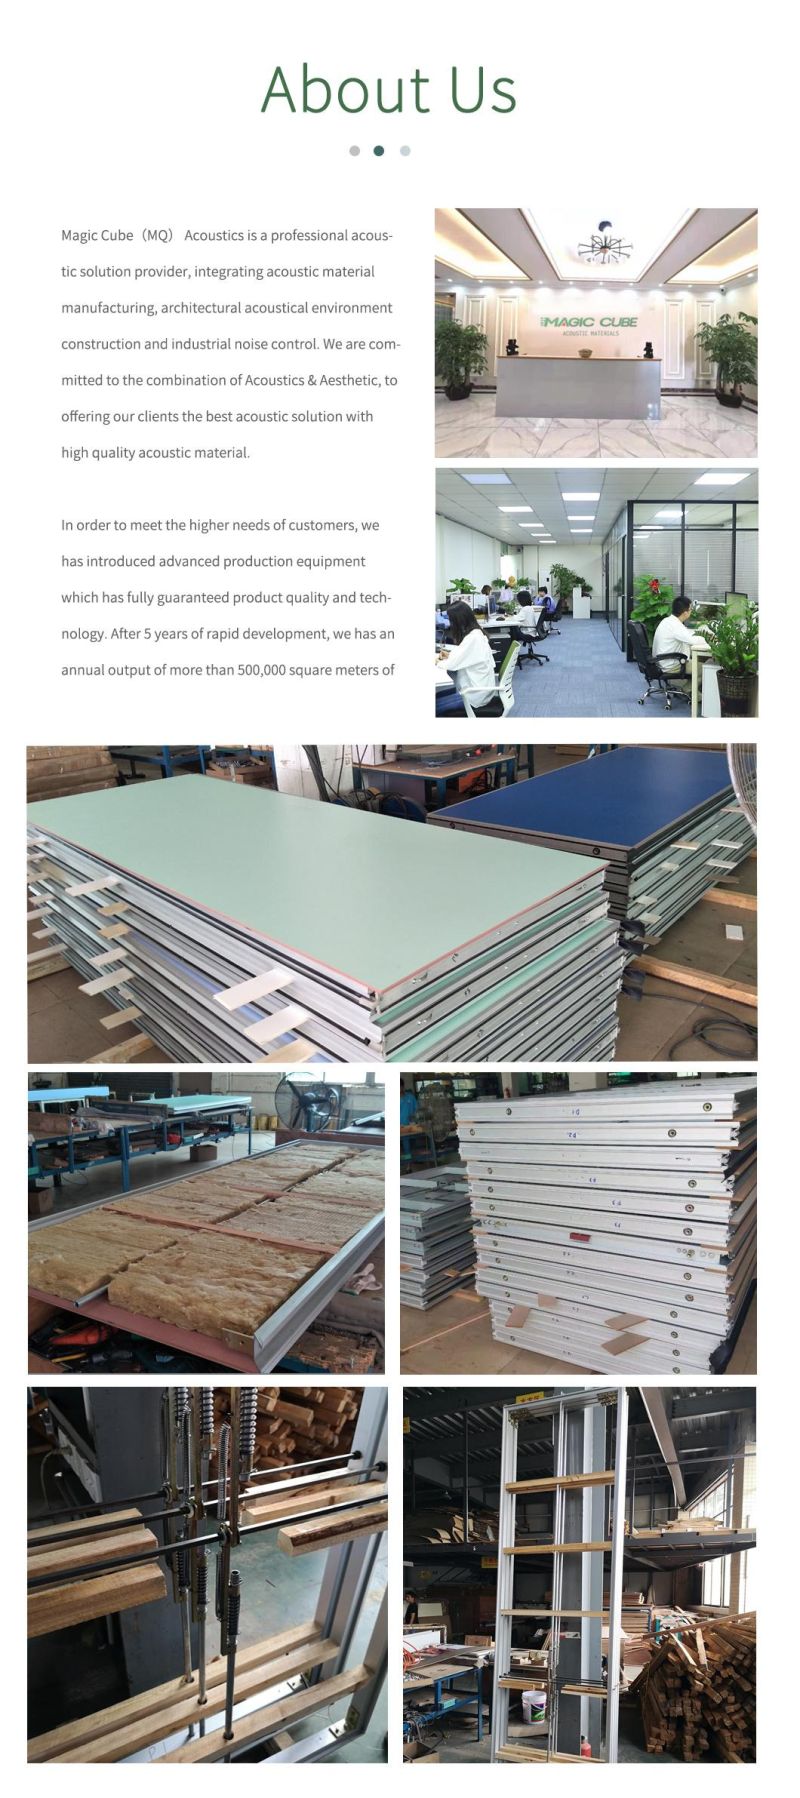 High Sound Insulation Semi-Automatic Operable Partition for Multi-Function Hall Movable Wall